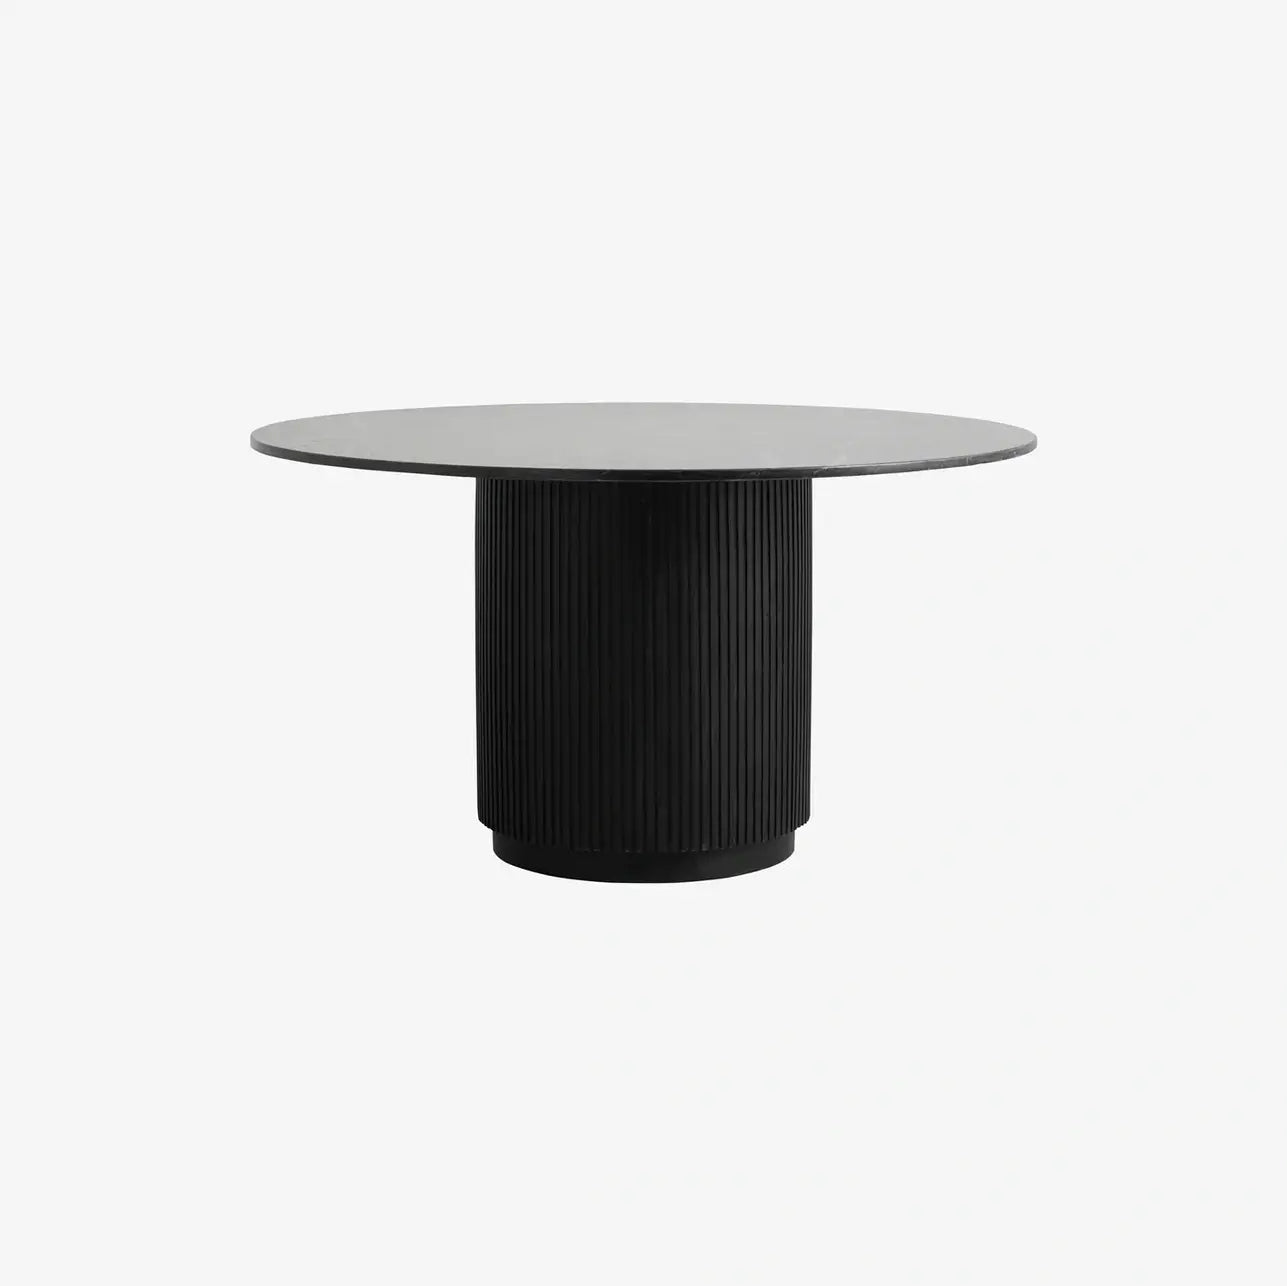 Nordal Erie Round Dining Table Black Marble Top 140 Cm